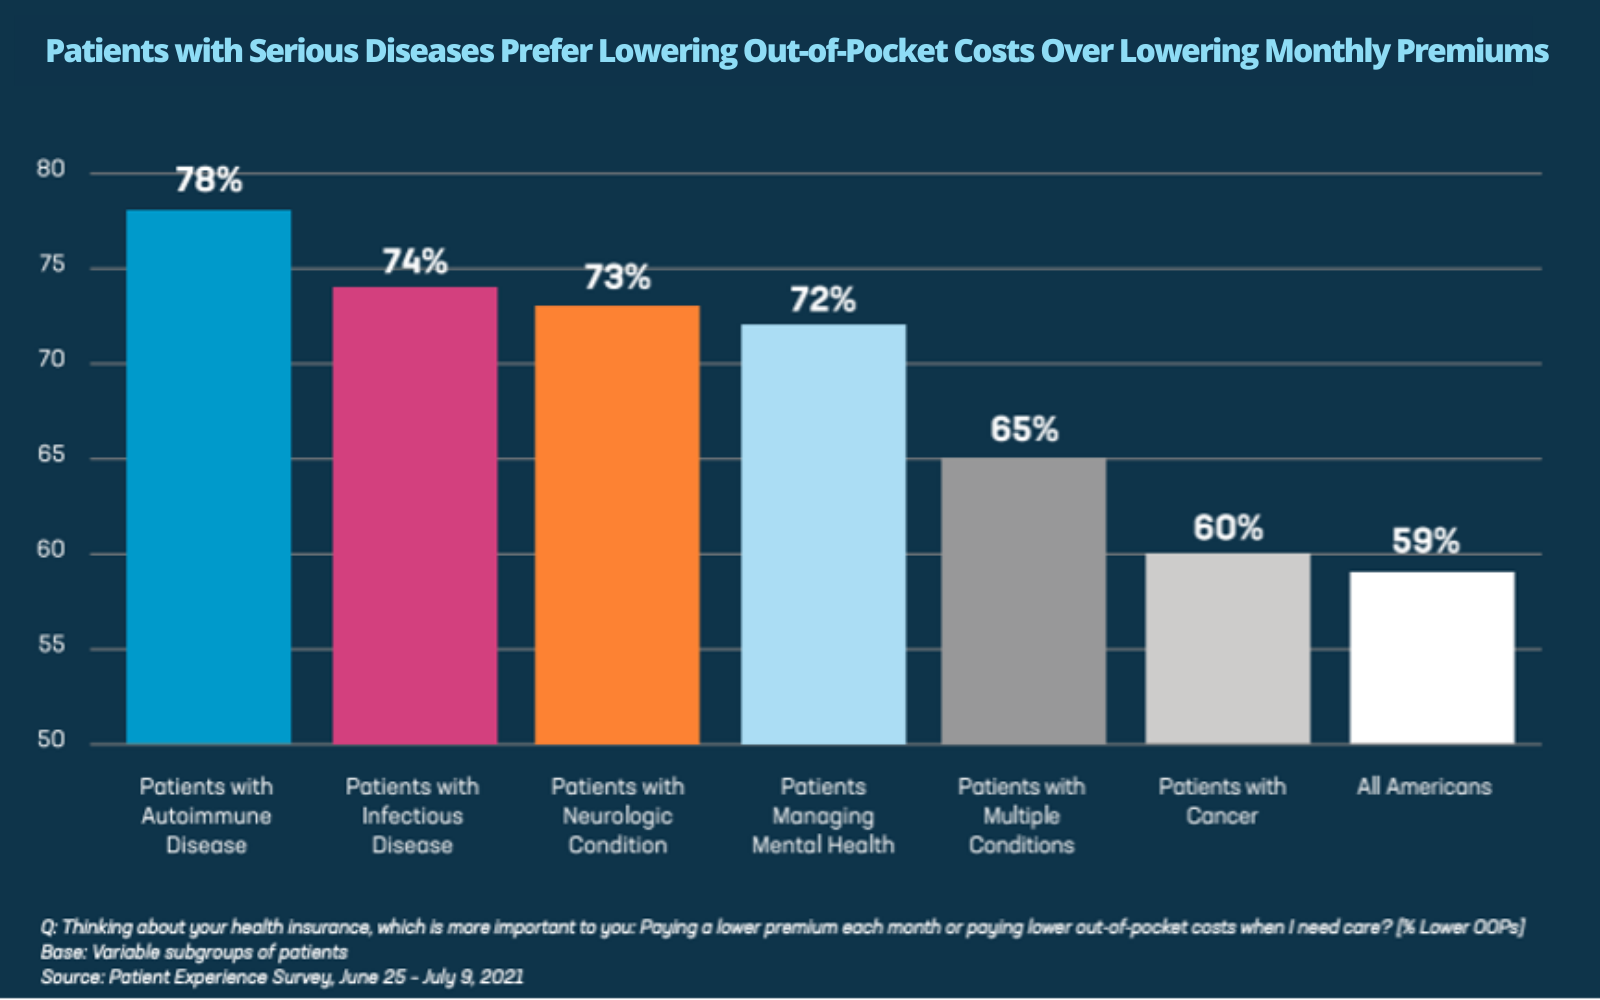 Patients with Serious Diseases Prefer Lowering Out-of-Pocket Costs Over Lowing Monthly Premiums